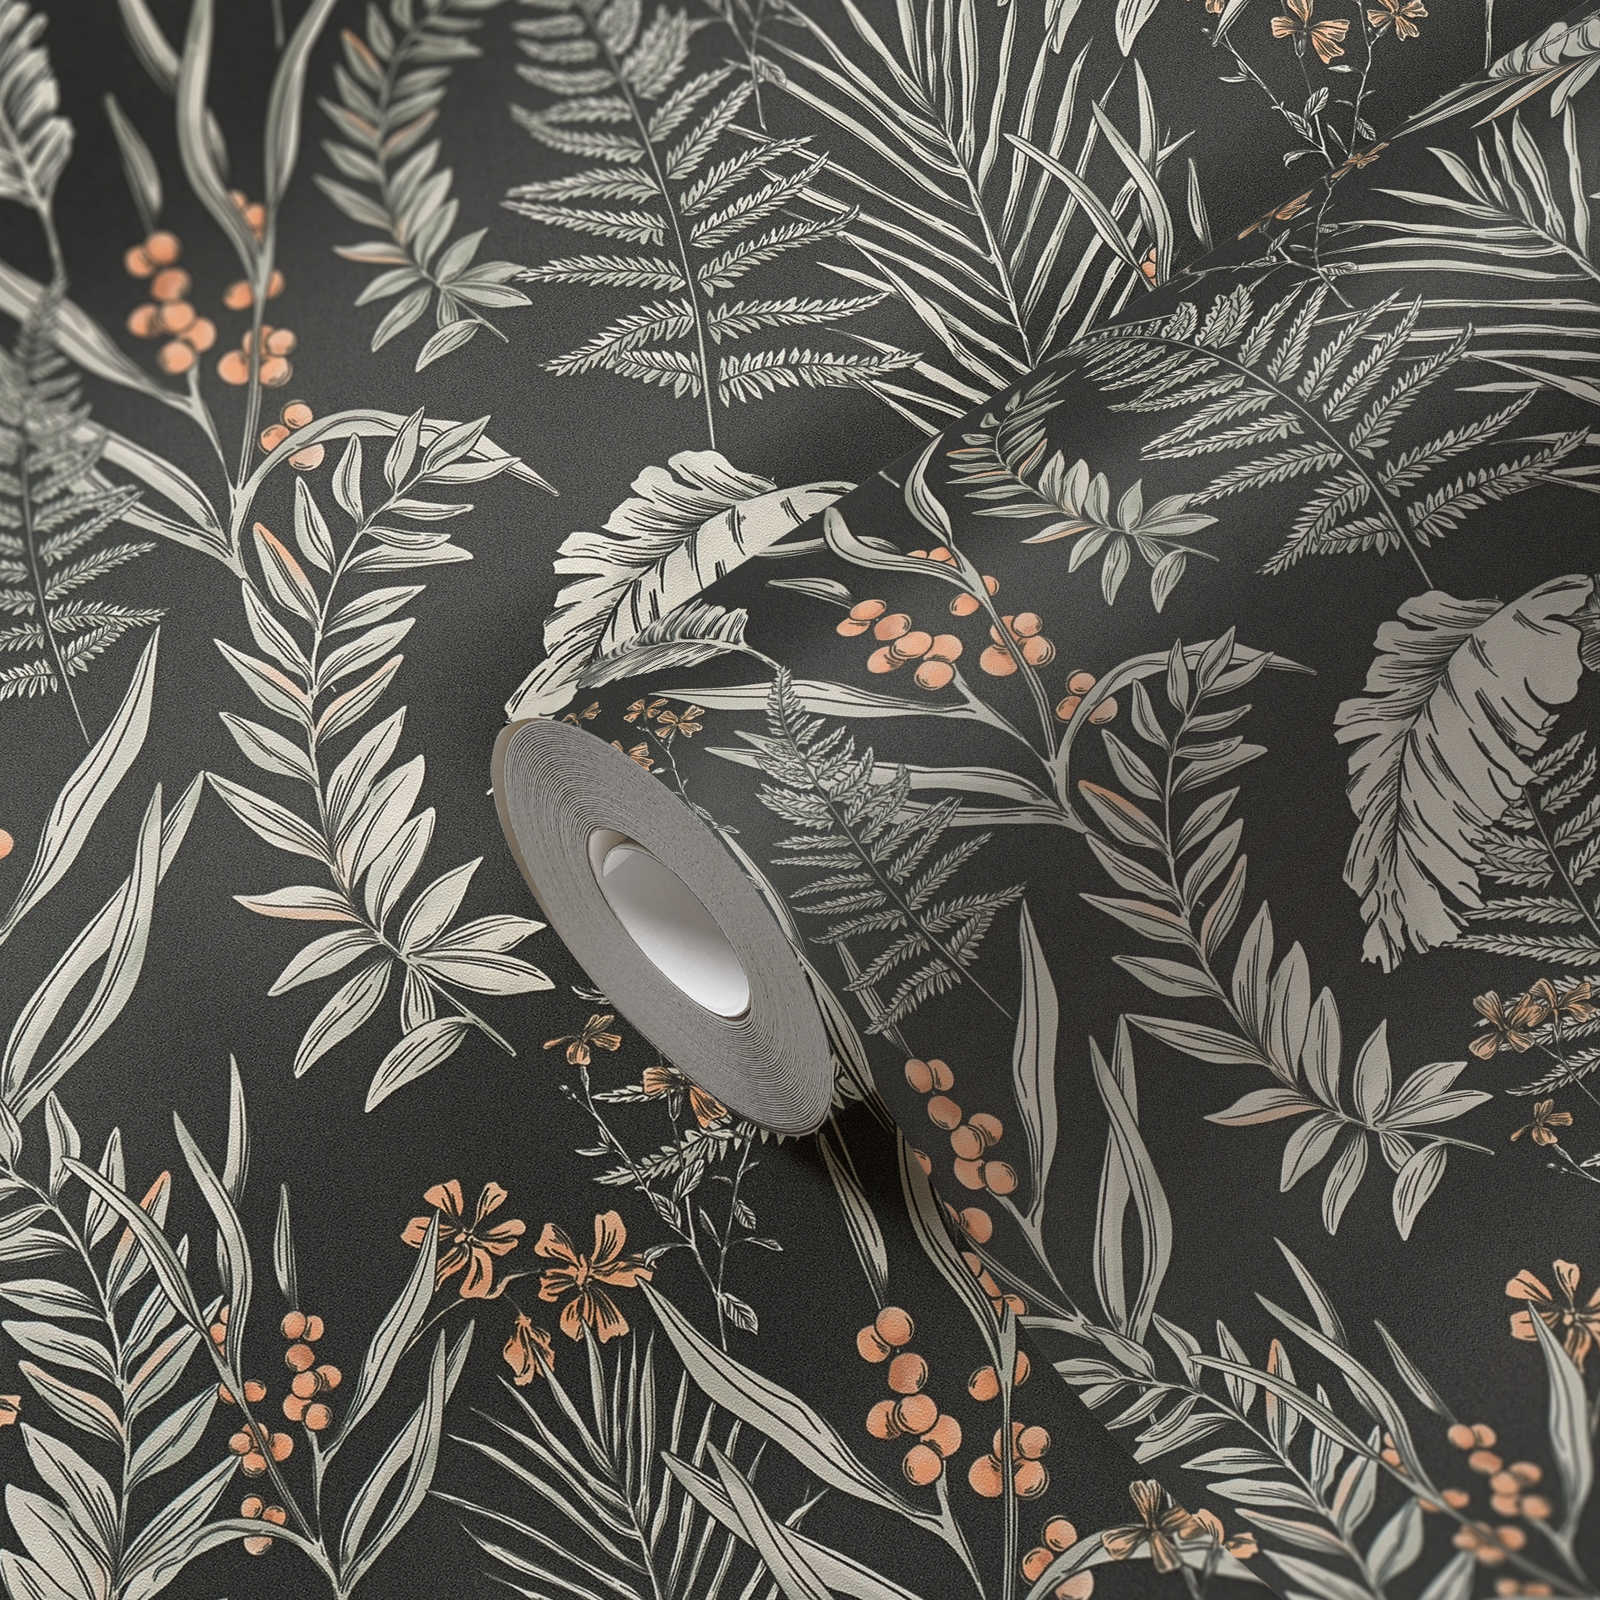             Floral wallpaper in modern style with flowers & leaves textured - Black, White, Orange
        